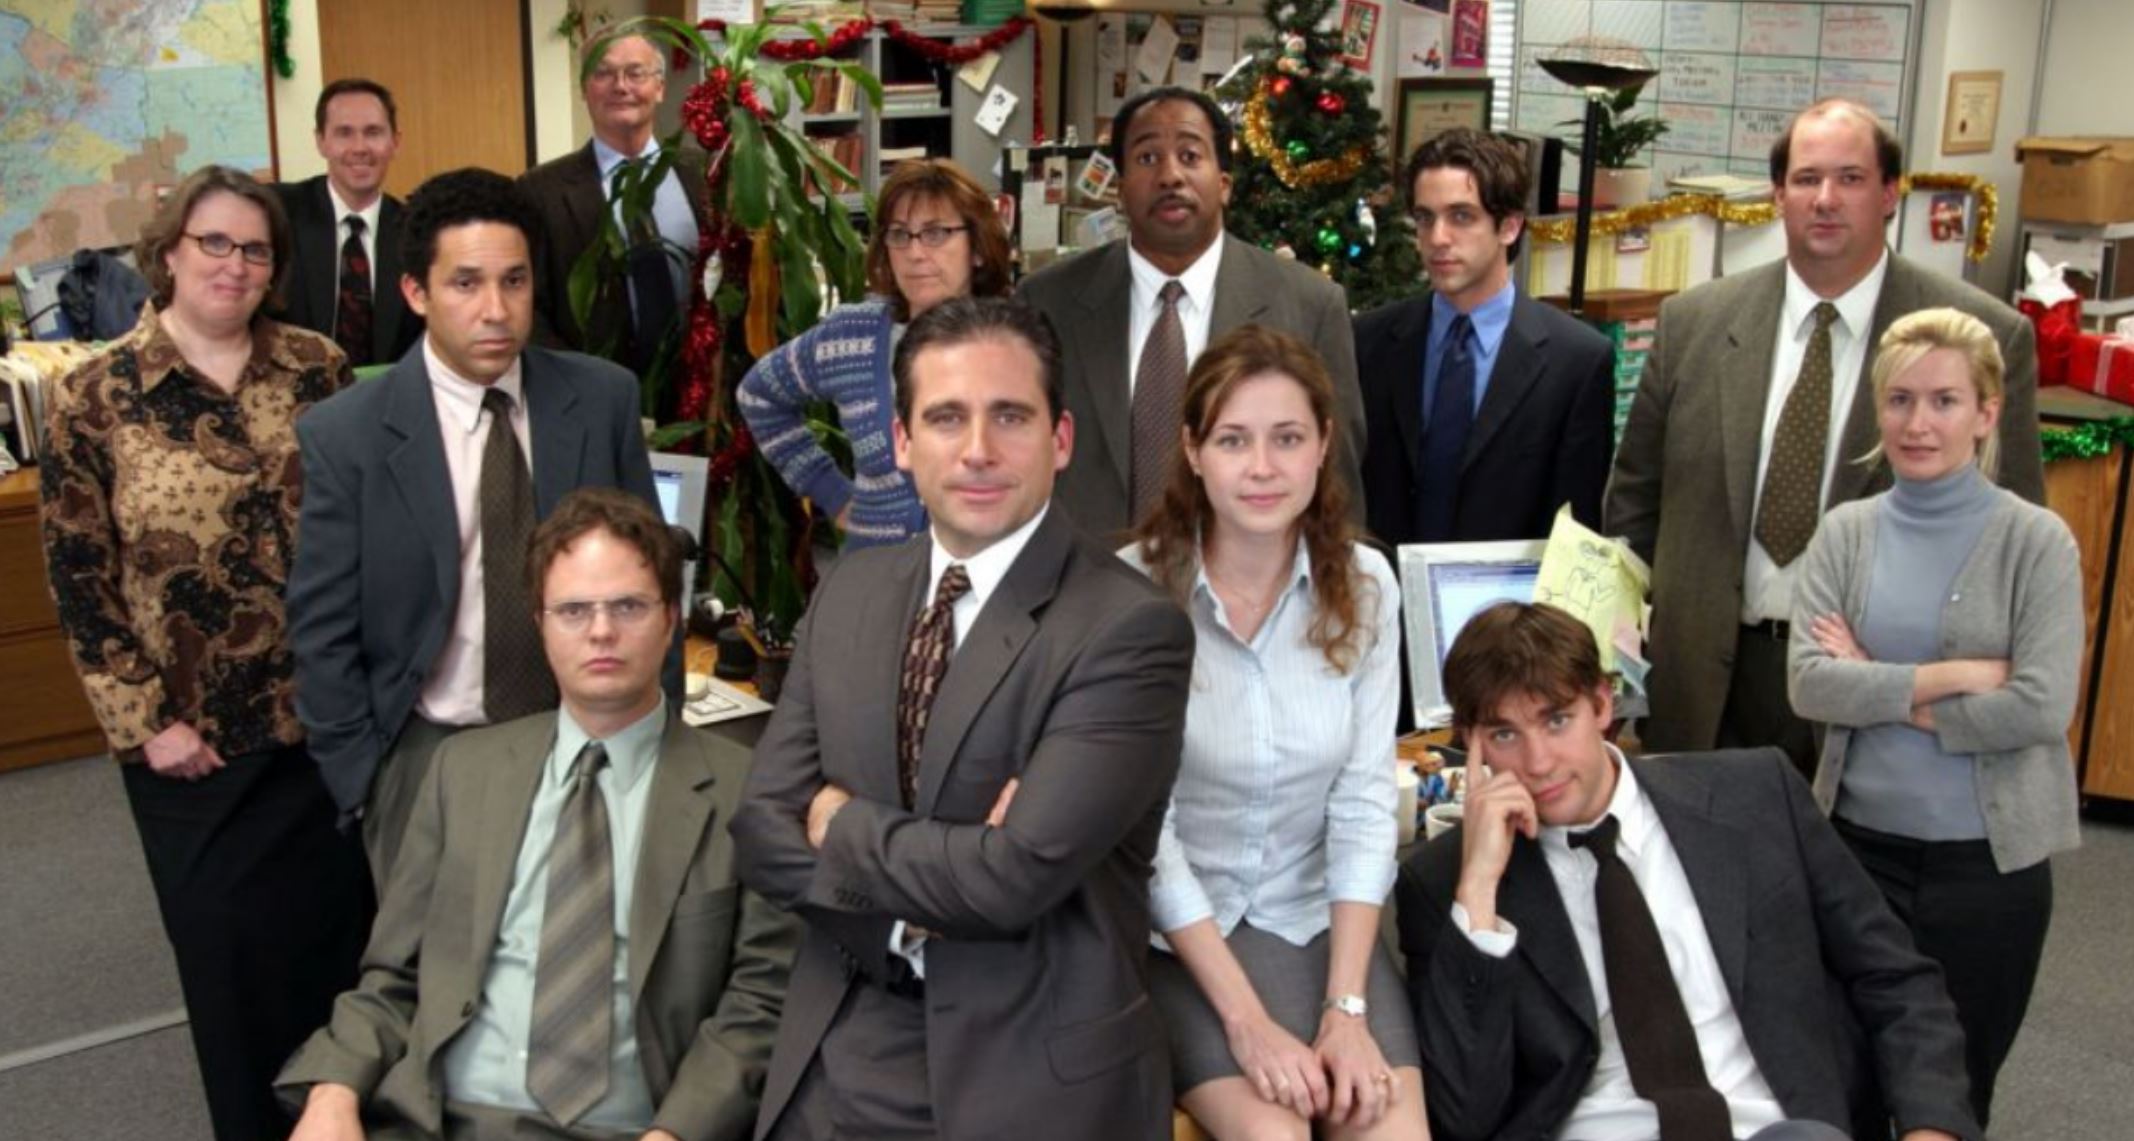 Is The Office On Netflix? (YES) Here Is How To Watch It In